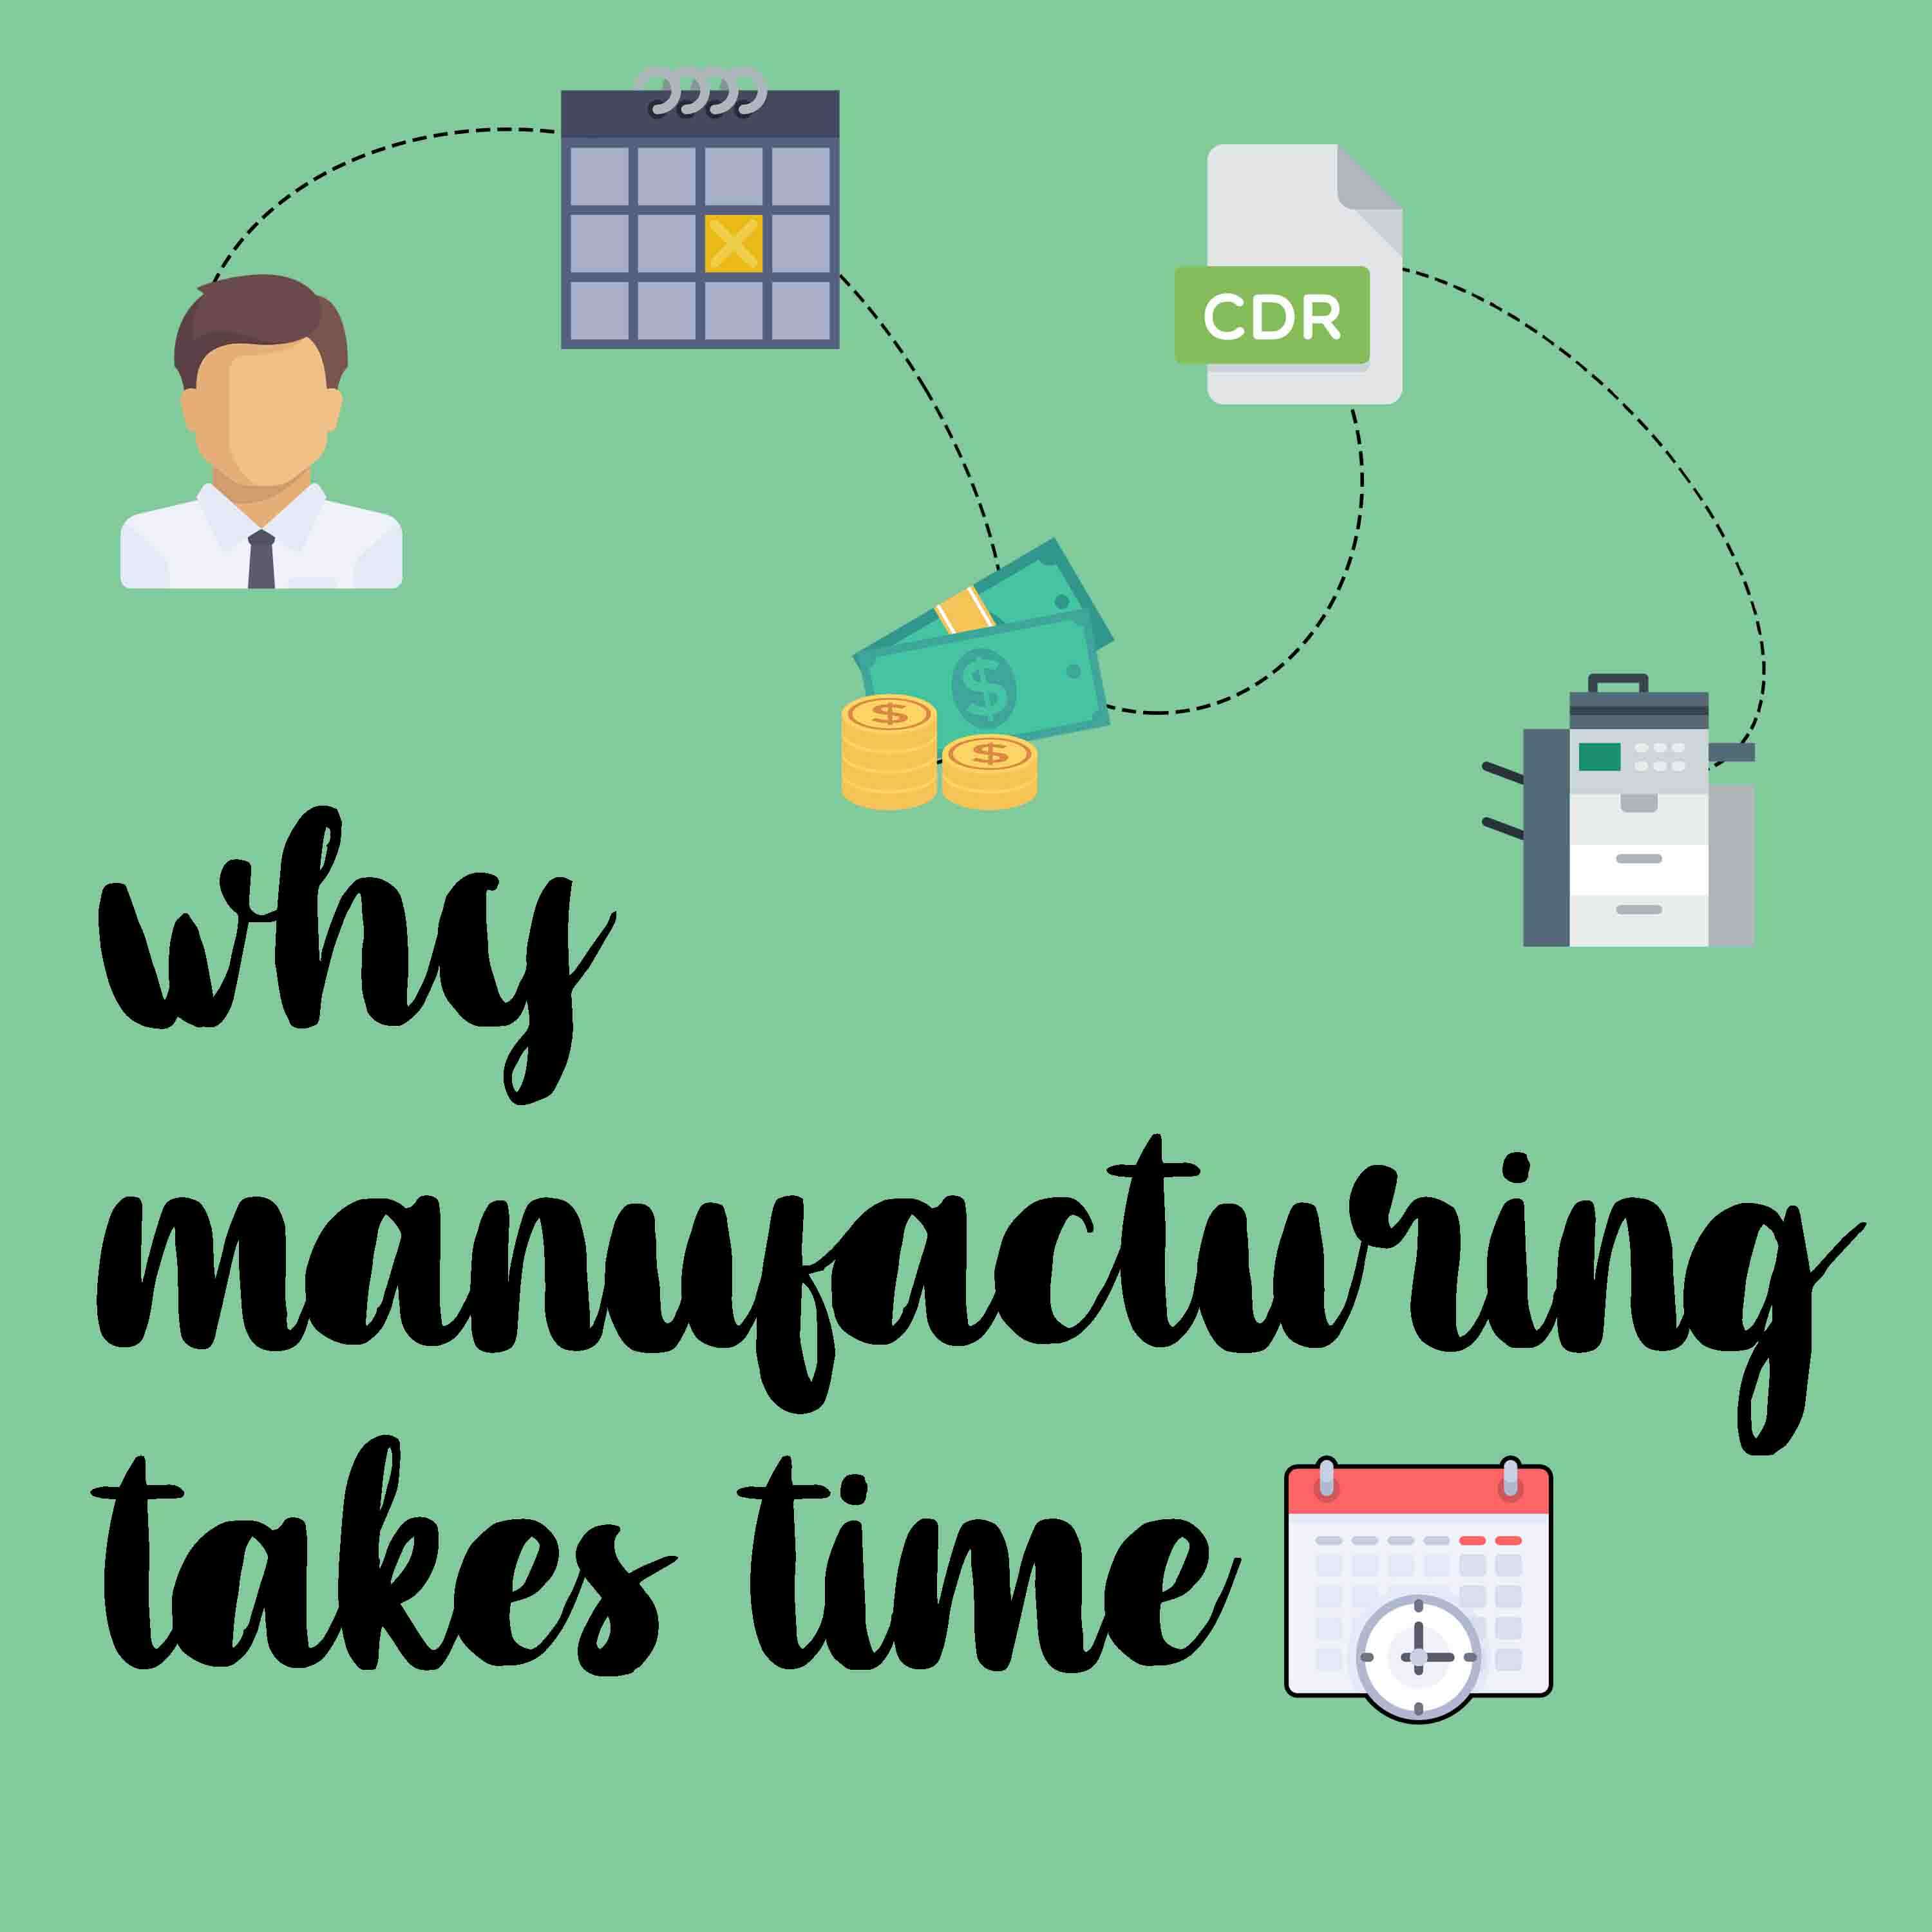 Why Manufacturing Takes Time Image